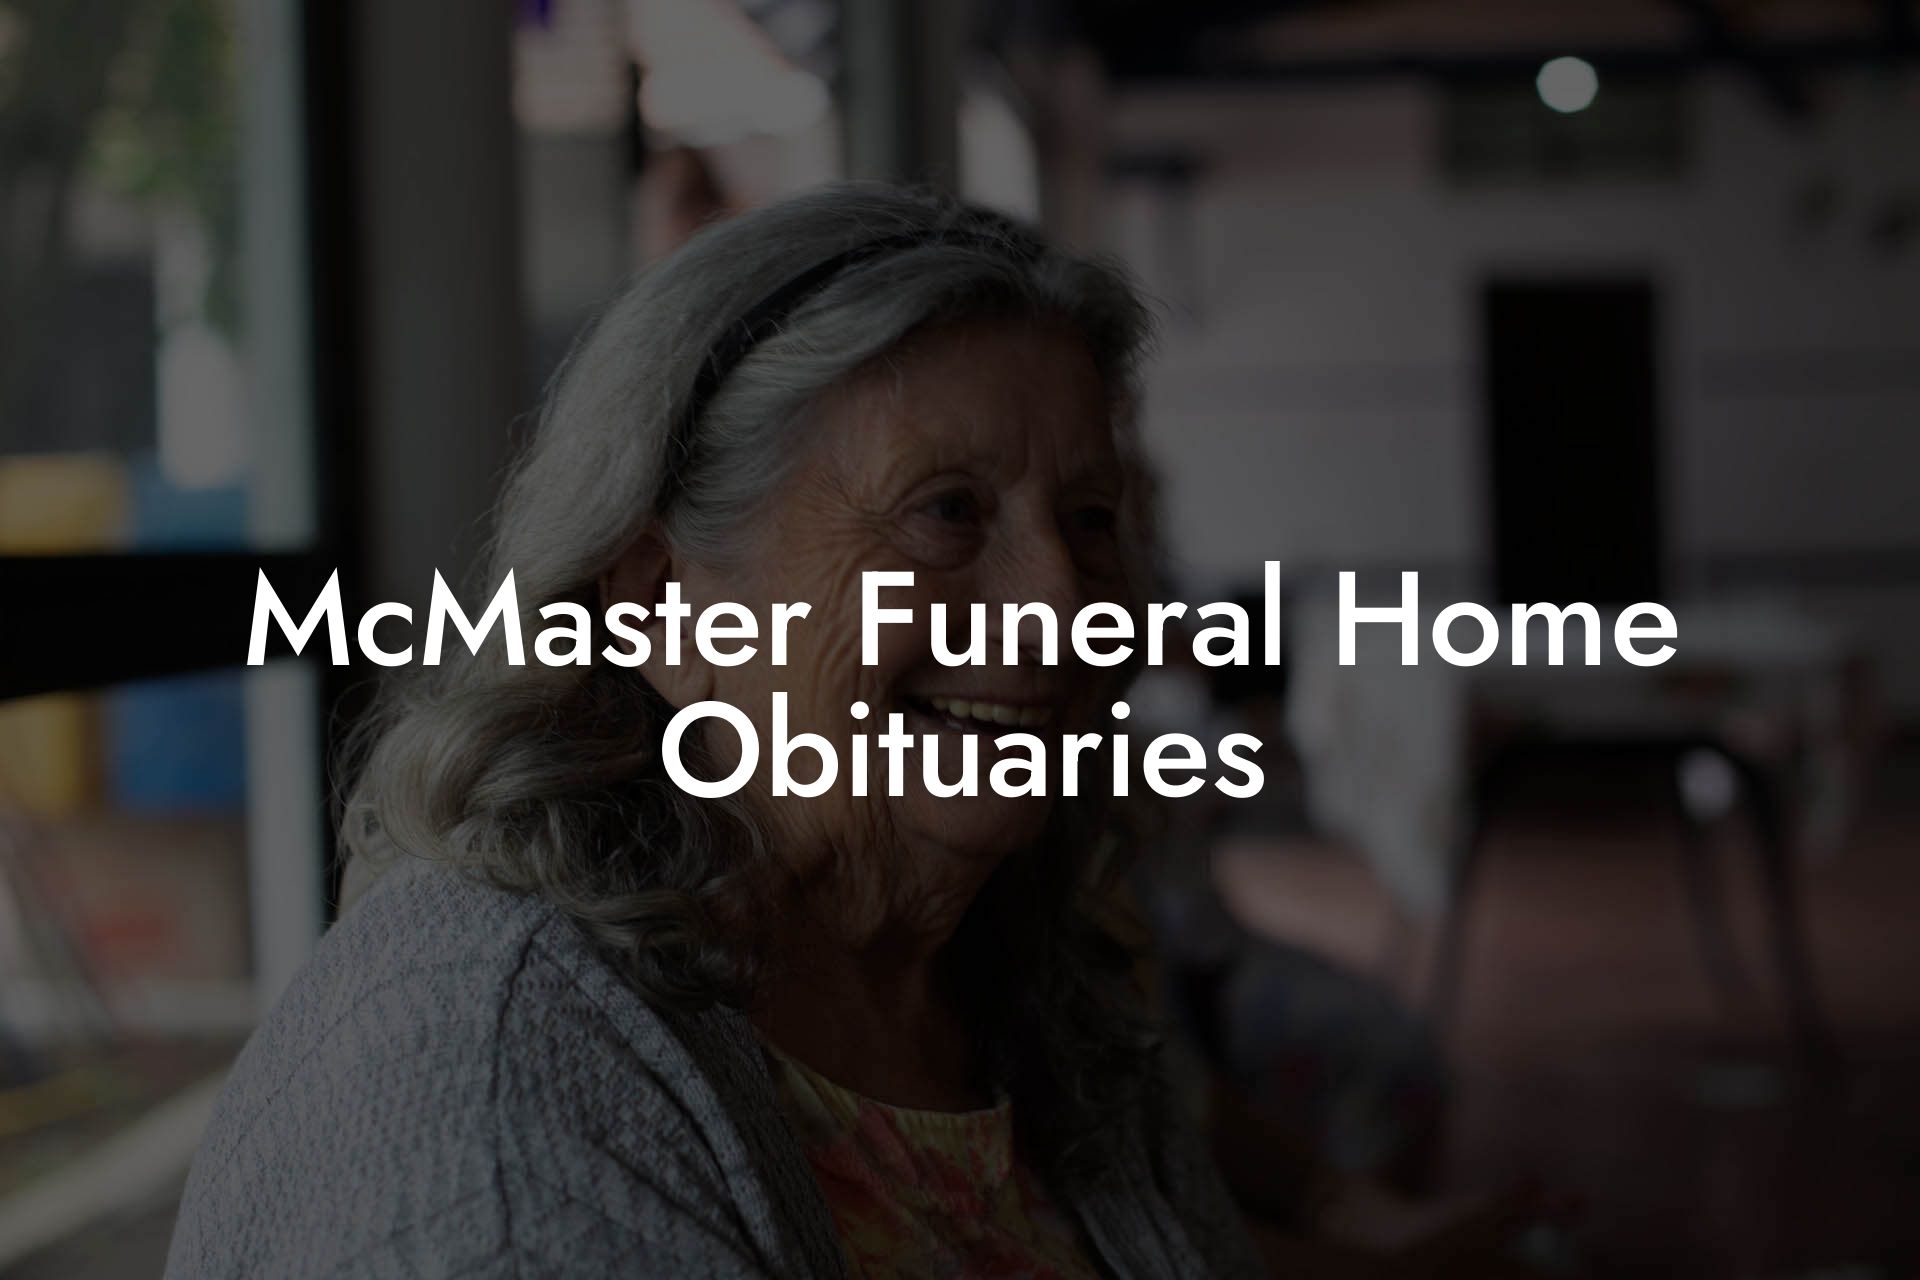 McMaster Funeral Home Obituaries